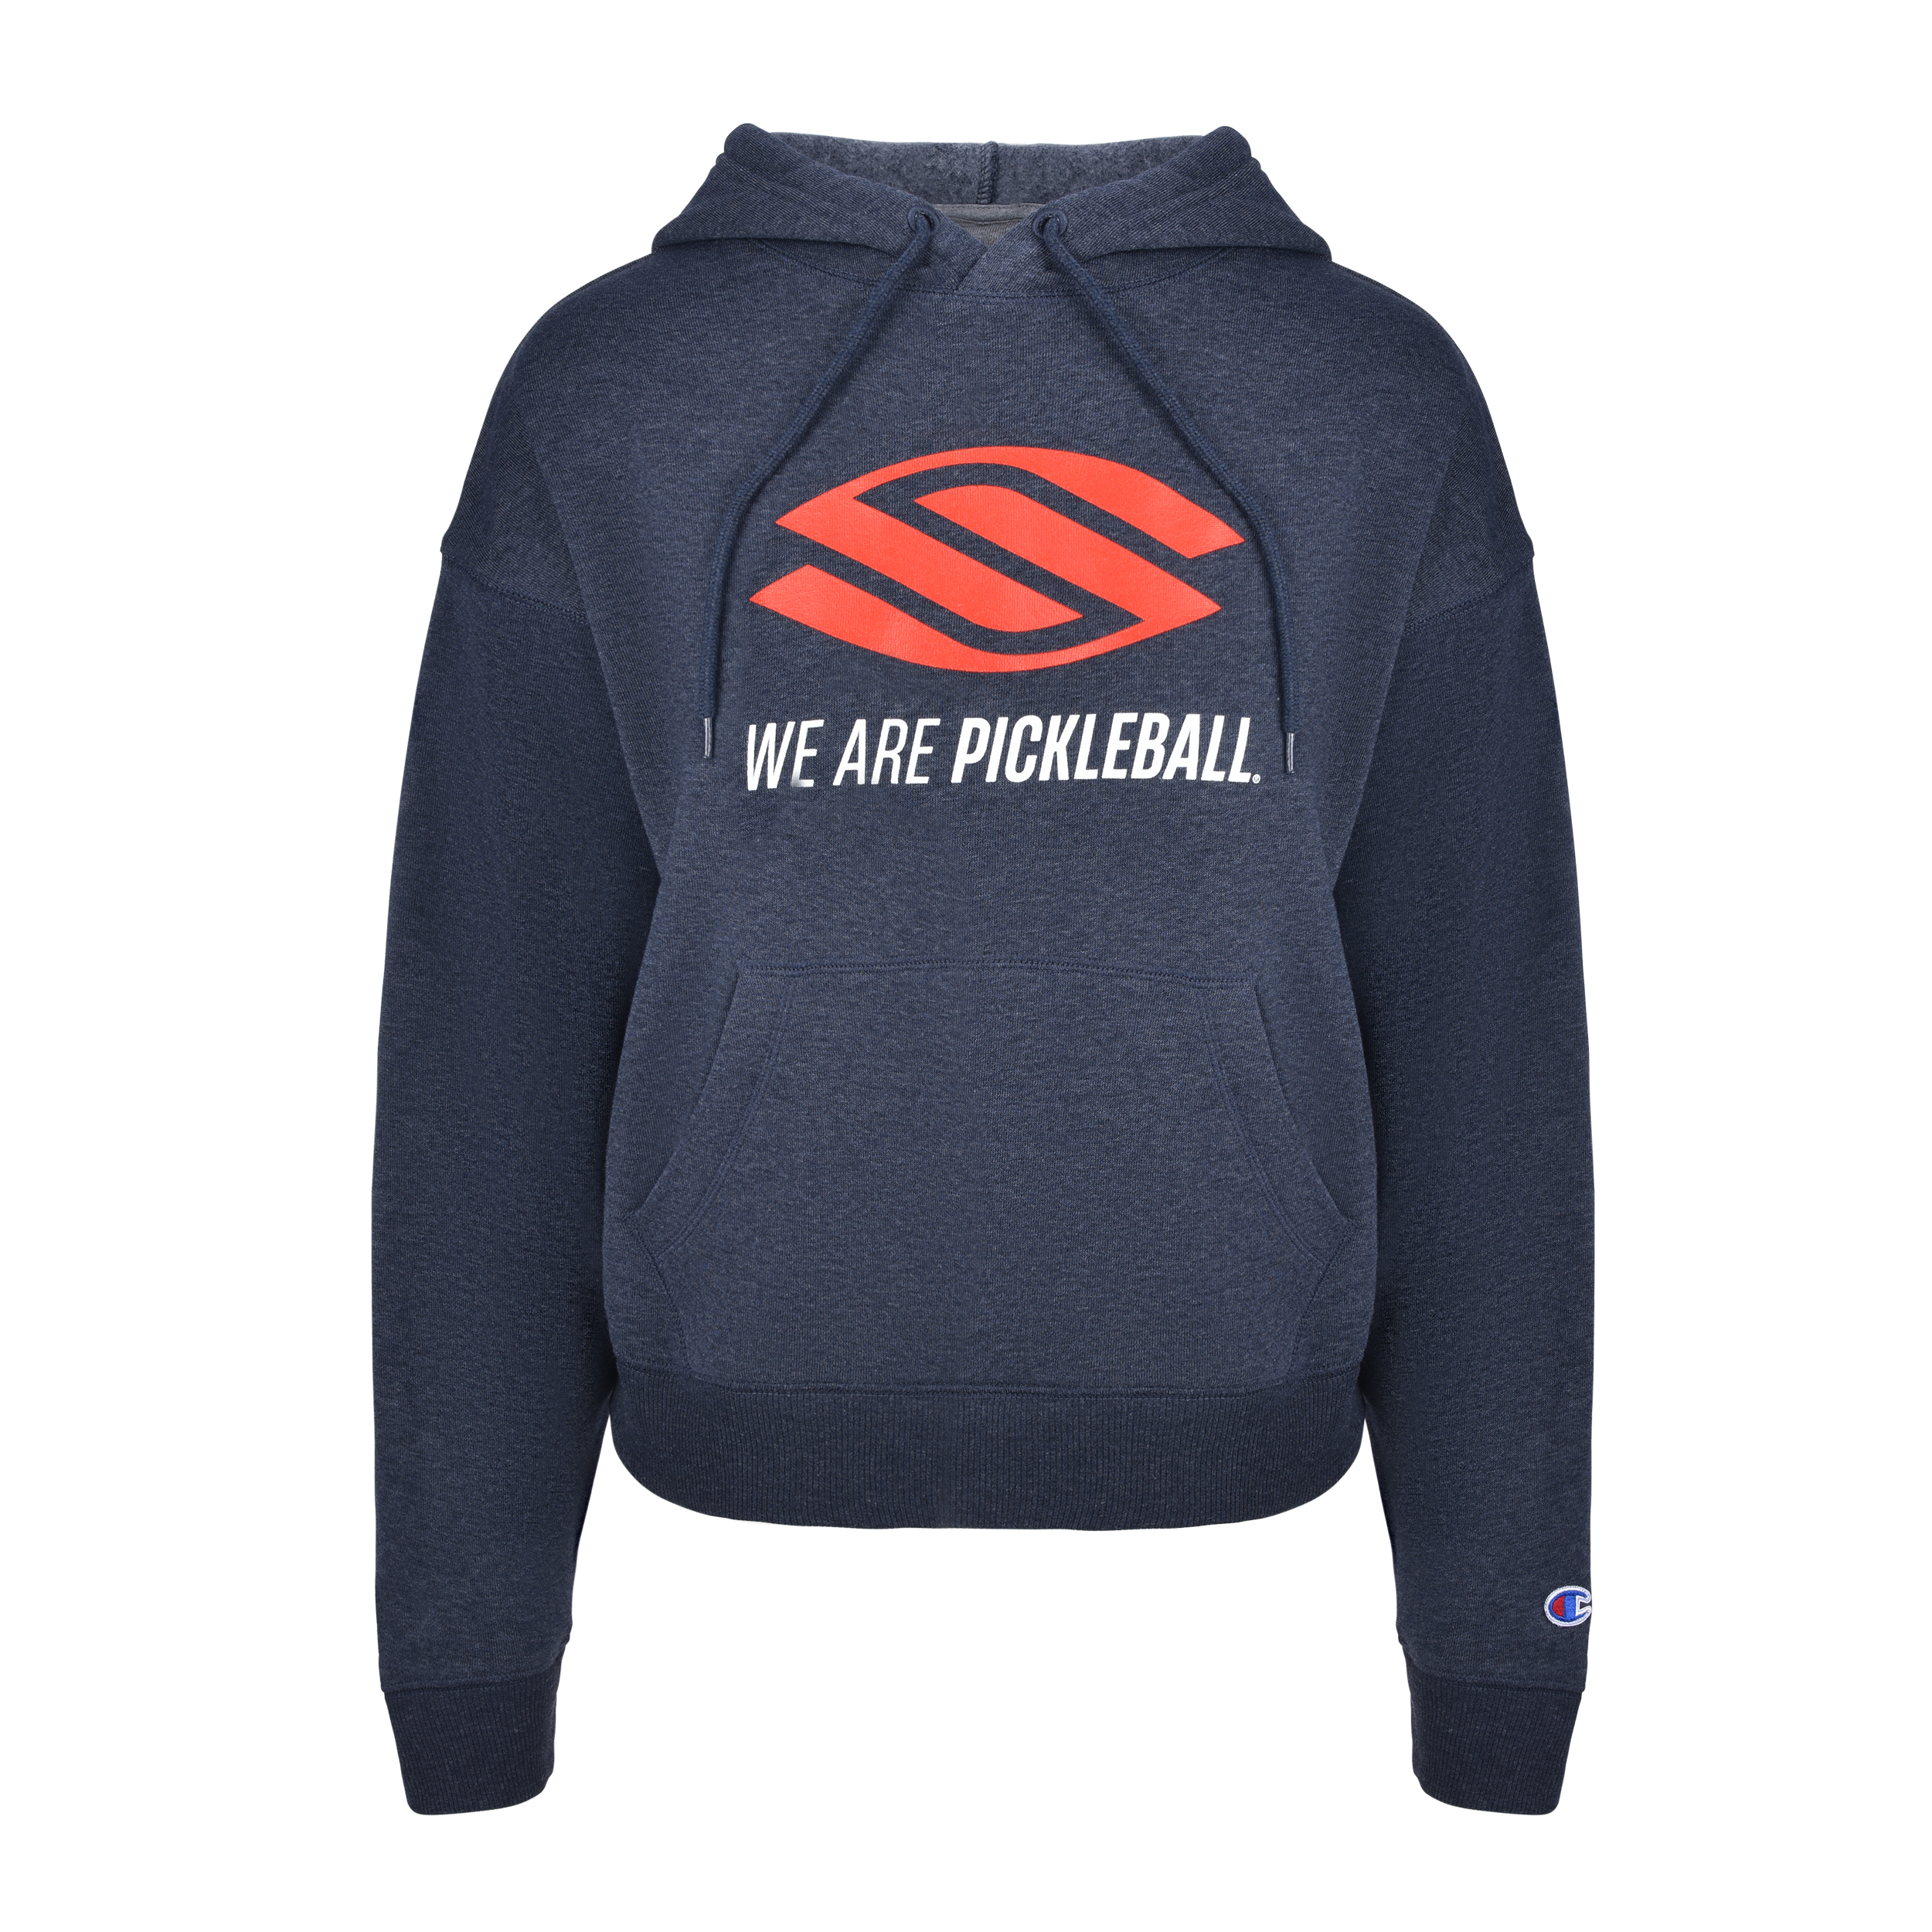 Tournament-approved pickleball apparel